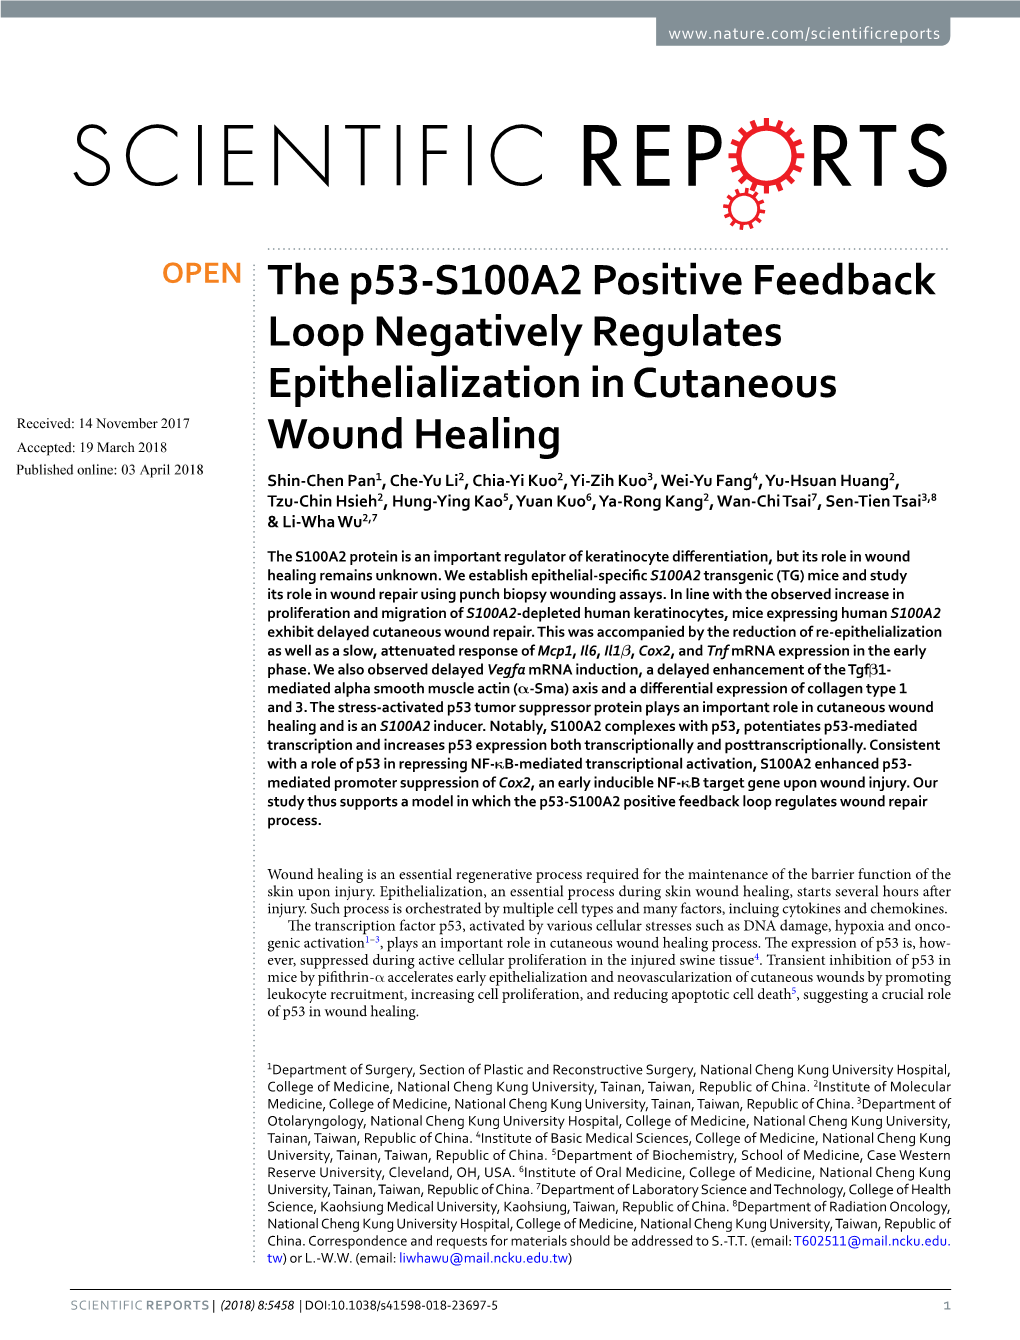 The P53-S100A2 Positive Feedback Loop Negatively Regulates